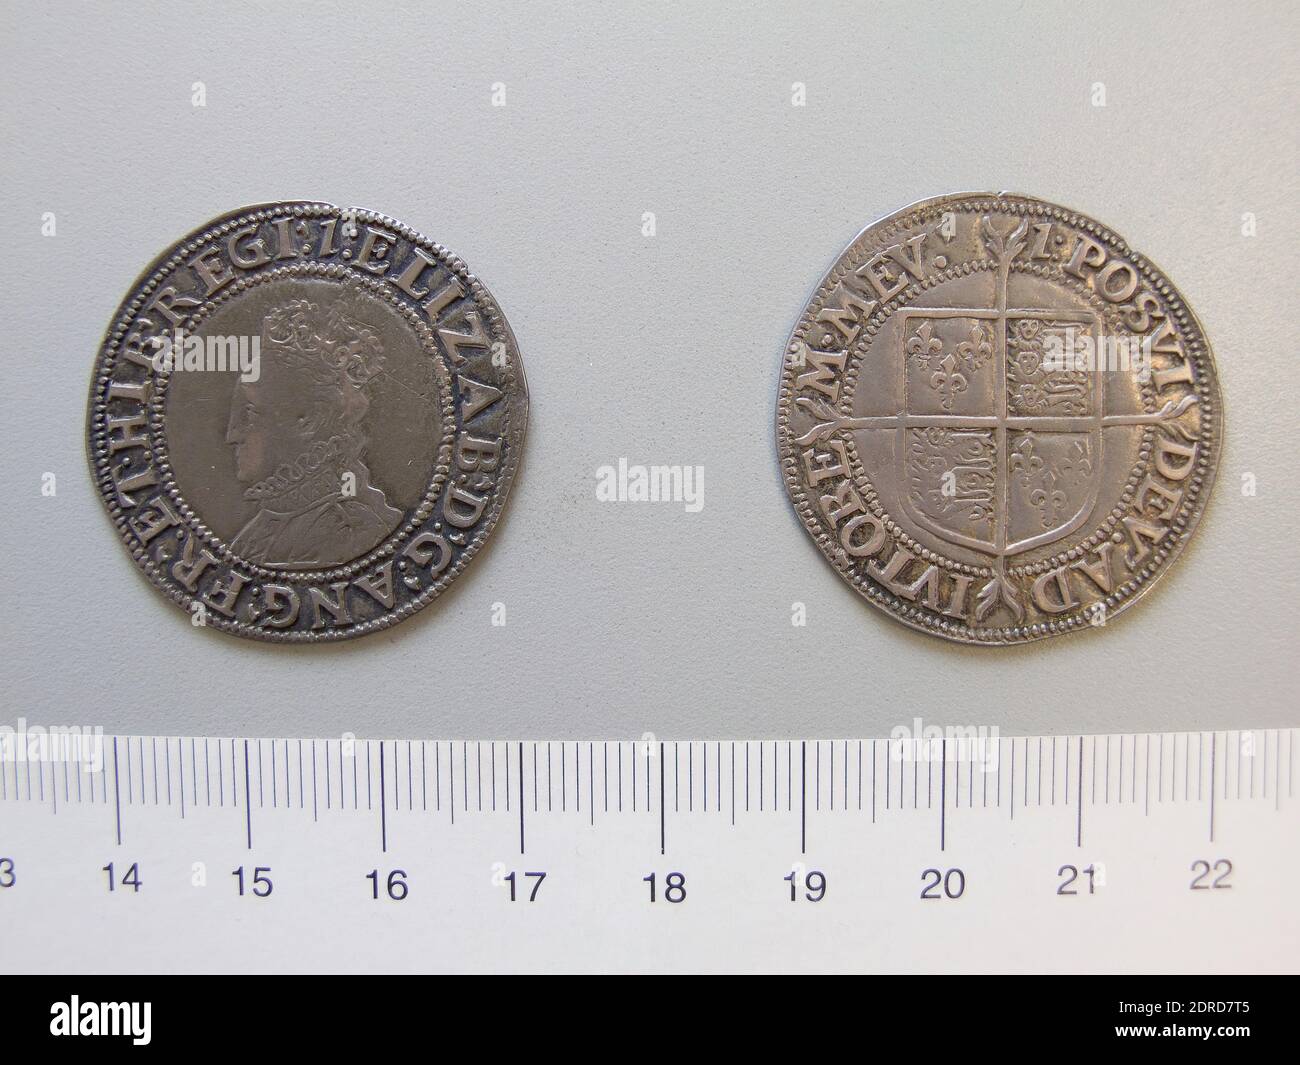 Ruler: Elizabeth I, Queen of England, British, 1533–1603, ruled 1558–1603, Mint: London, 1 Shilling of Elizabeth I, Queen of England from London, Silver, 5.81 g, 10:00, 32.5 mm, Made in London, England, British, 17th century, Numismatics Stock Photo